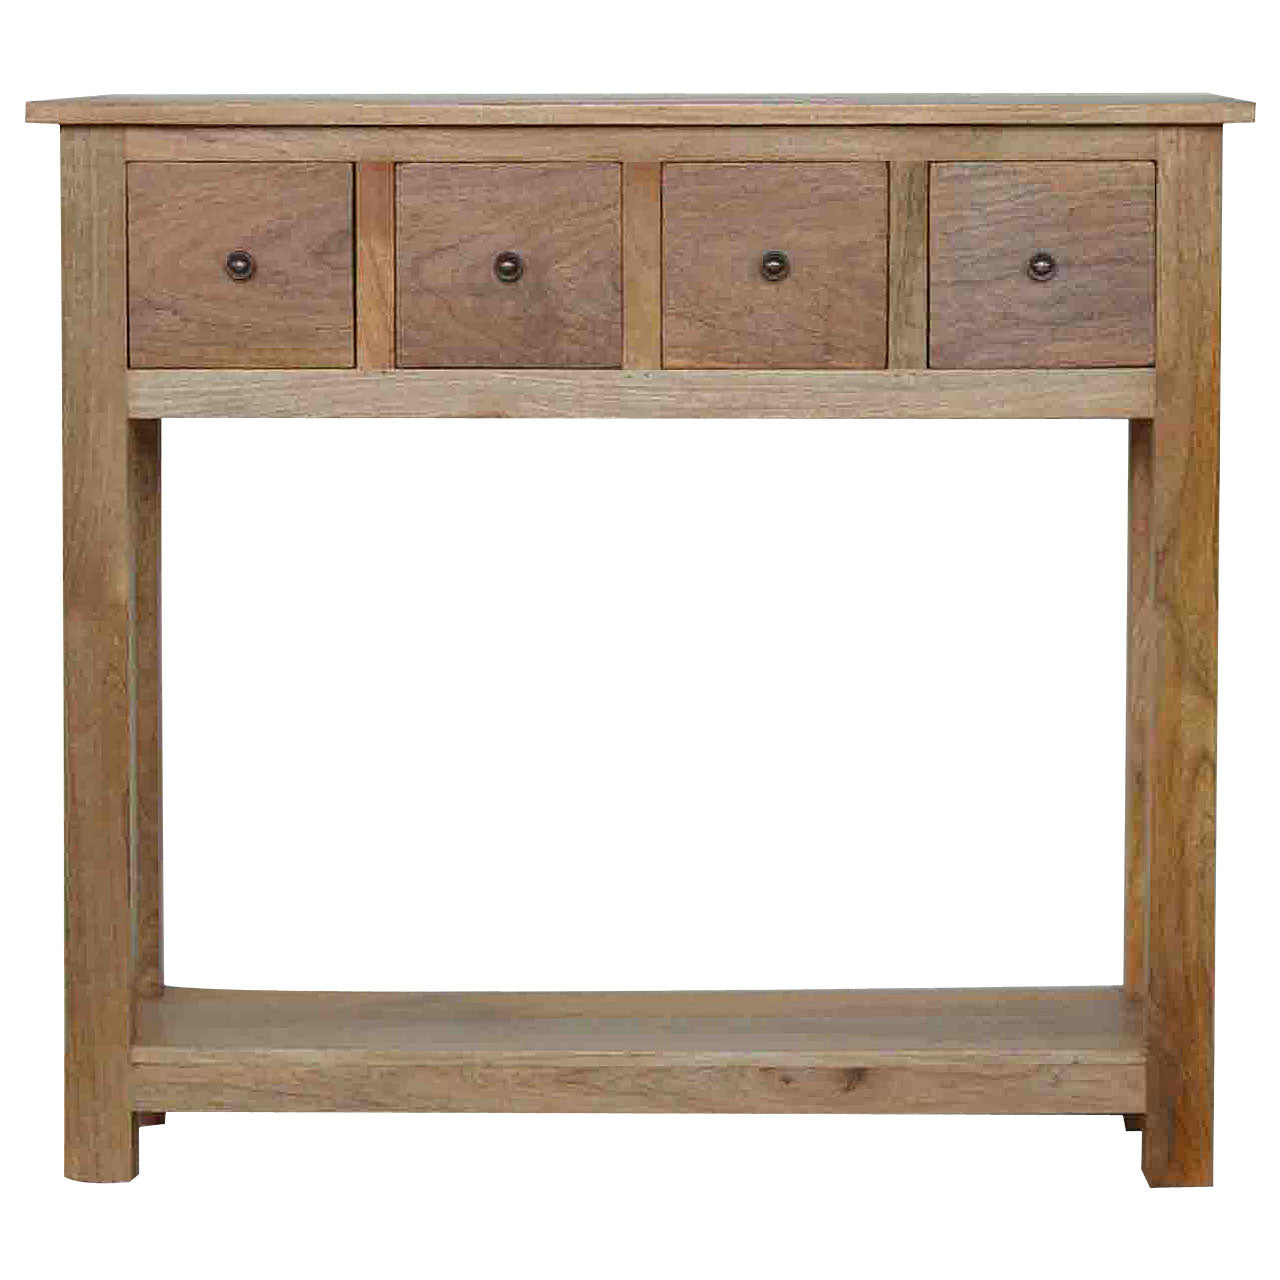 View 4 Drawer Country Console information